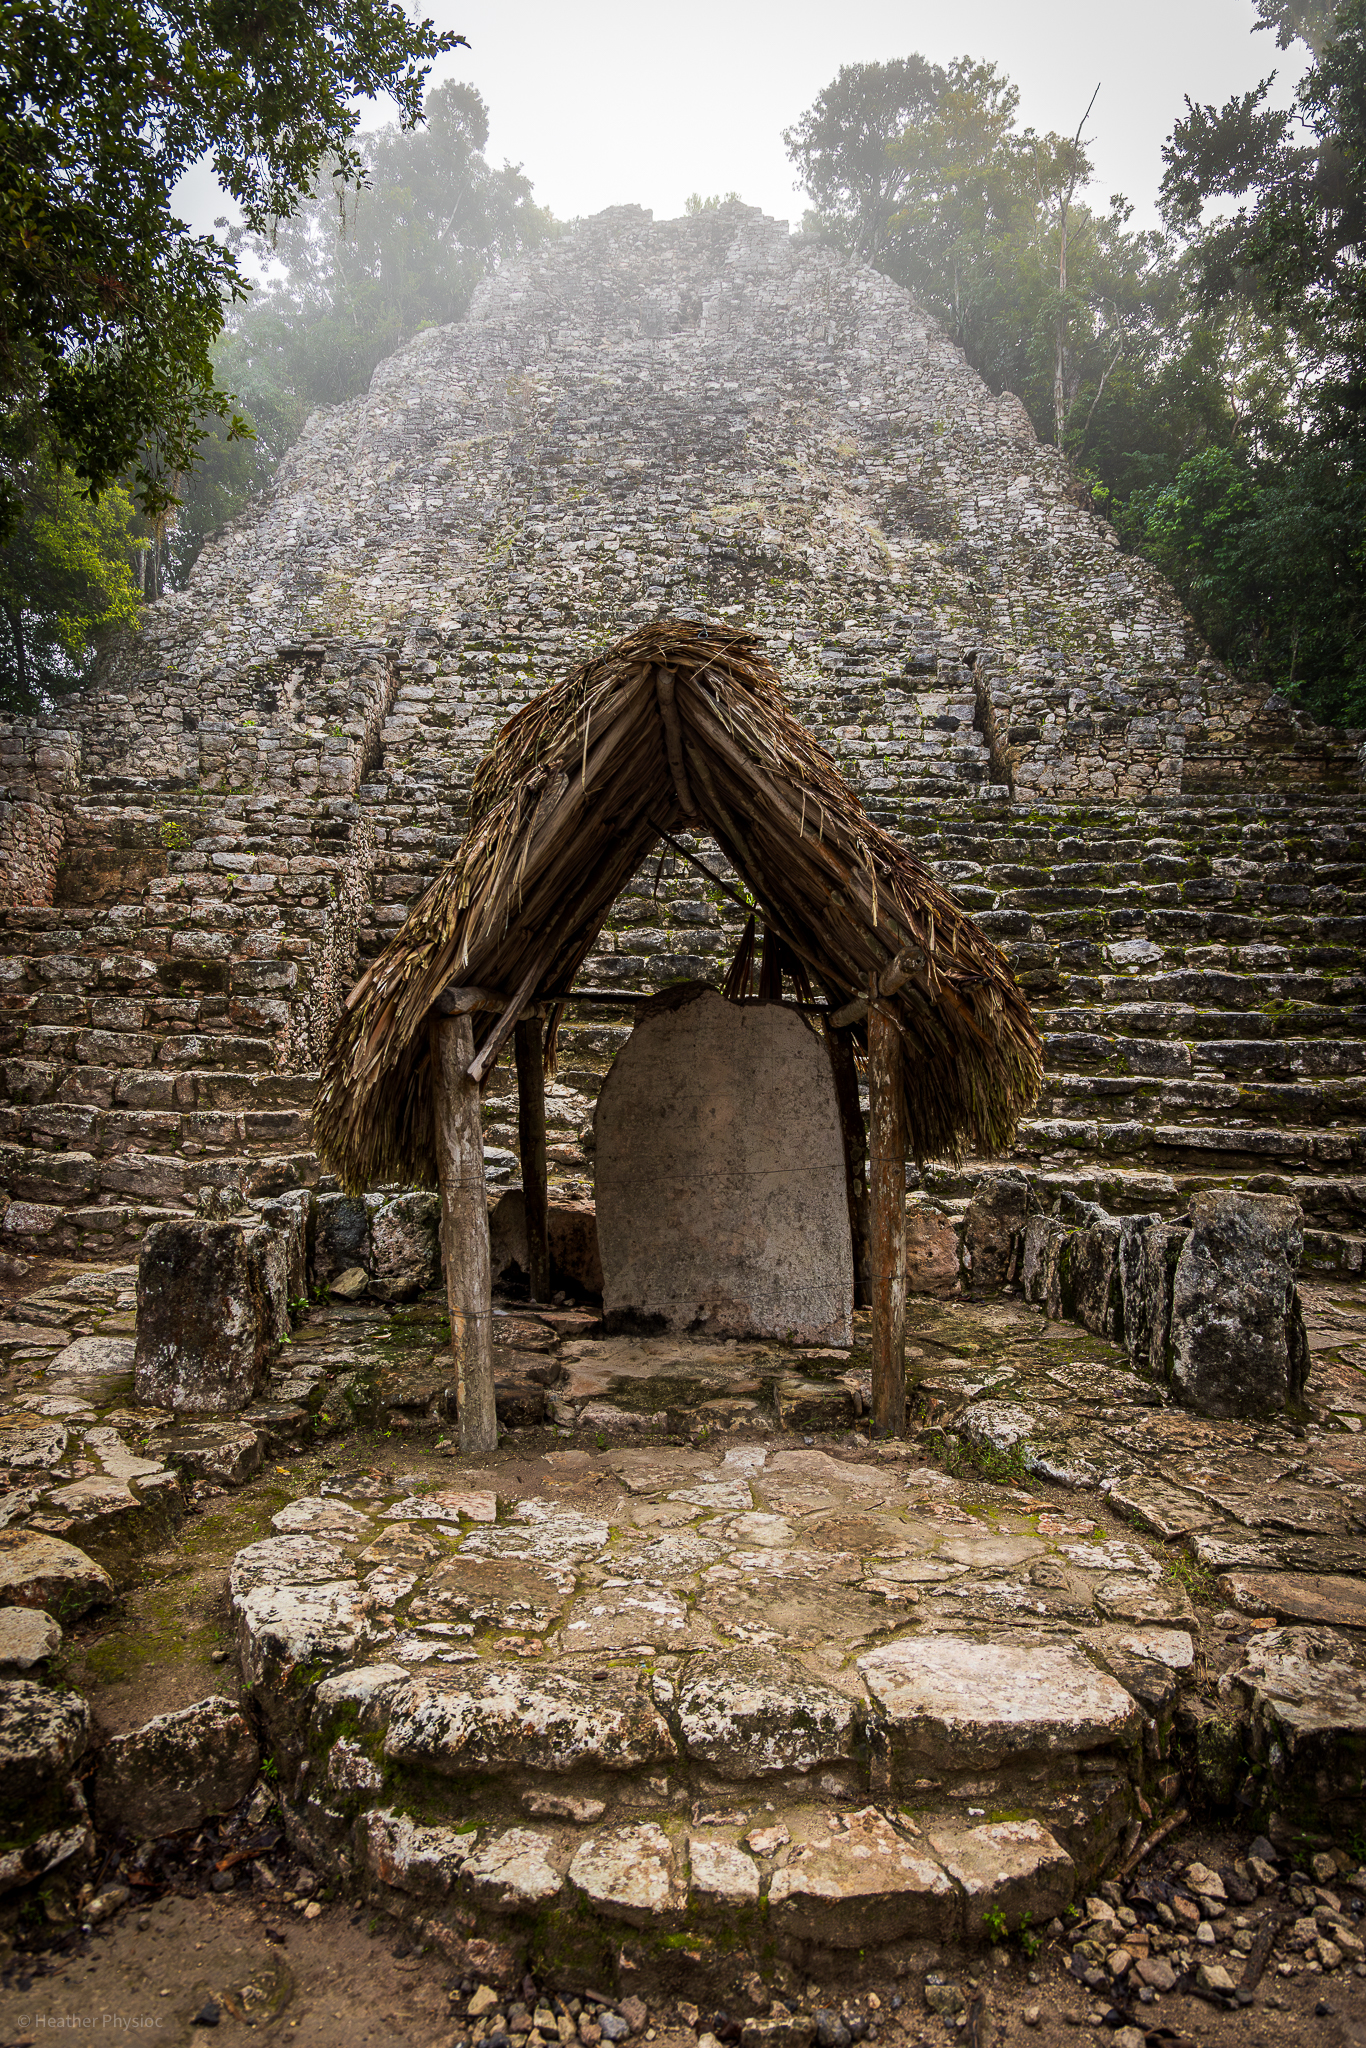 An ancient stone stele protected by a thatched palm roof at the base of the La Iglesia temple pyramid in Coba, Yucatan, Mexico. The pyramid, shrouded in a mystical fog, towers in the background, its vast stone steps ascending into the trees.